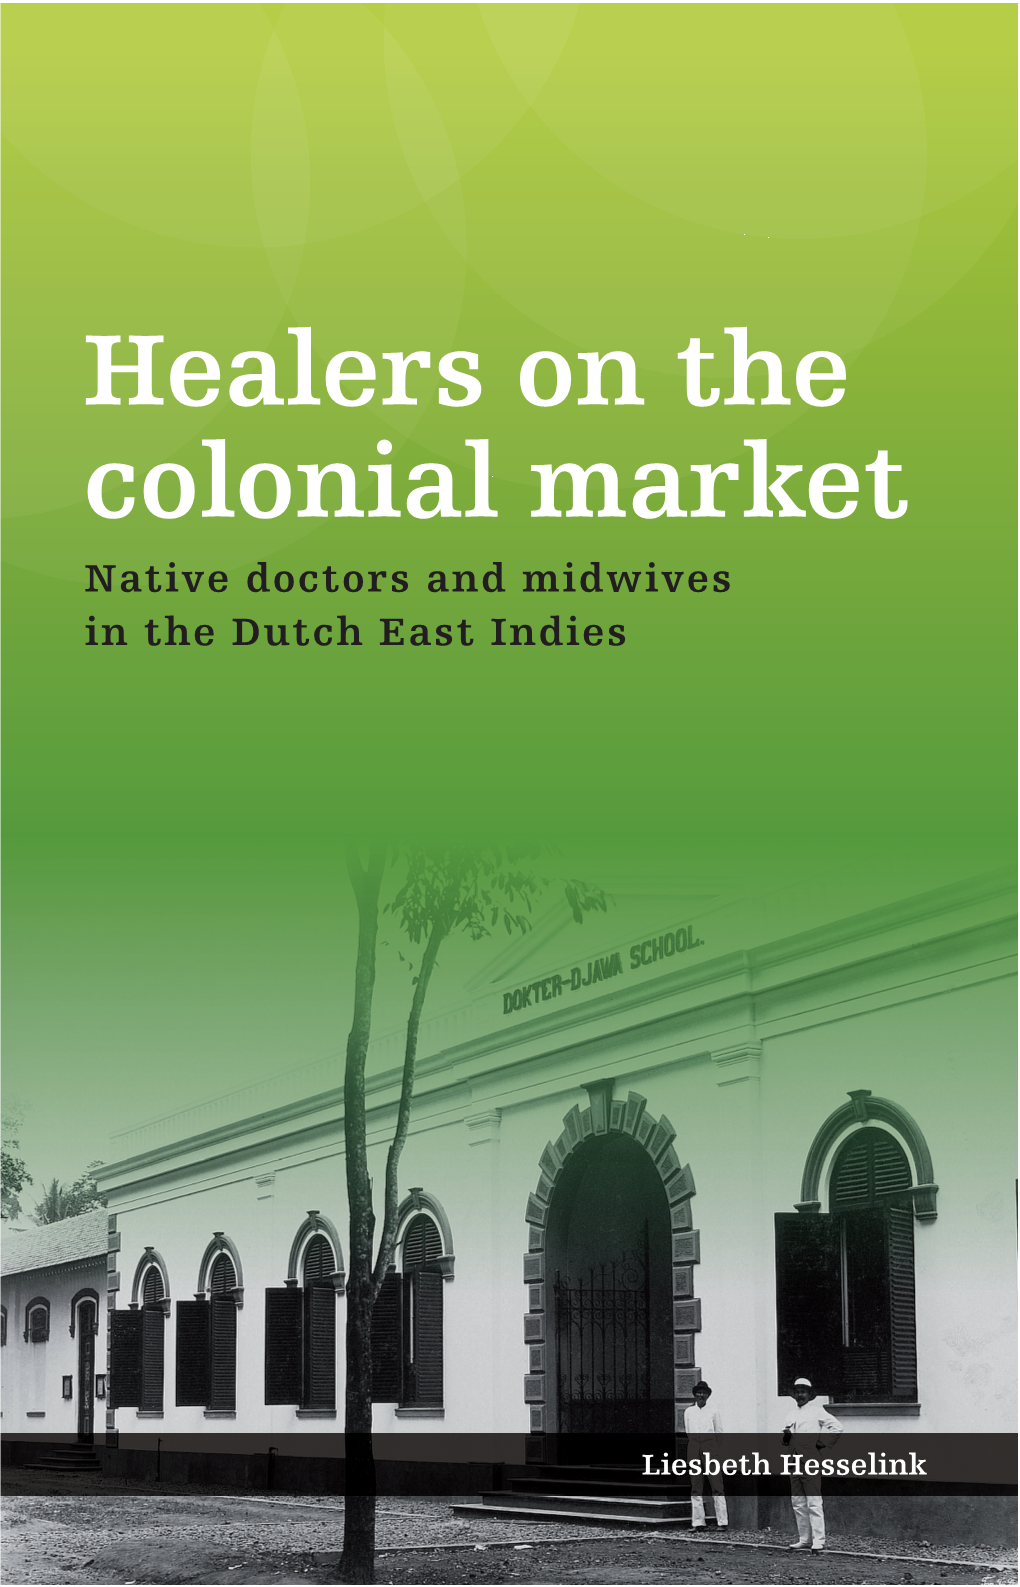 KITLV Healers on the Colonial Market Def.Indd 1 10-11-11 11:34 HEALERS on the C OLONIAL MARKET